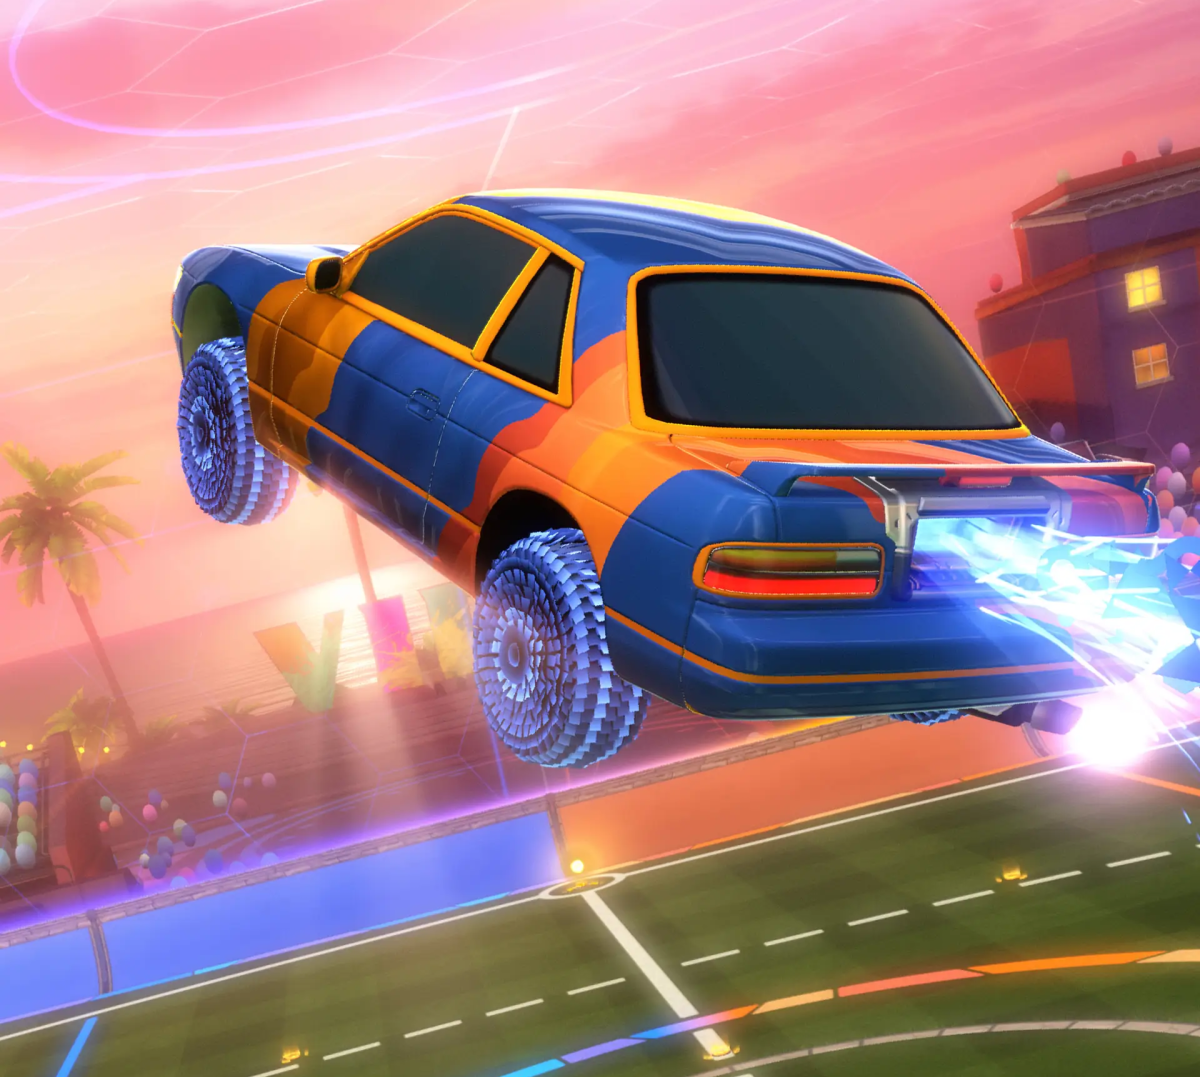 A screenshot from the free-to-play game Rocket League